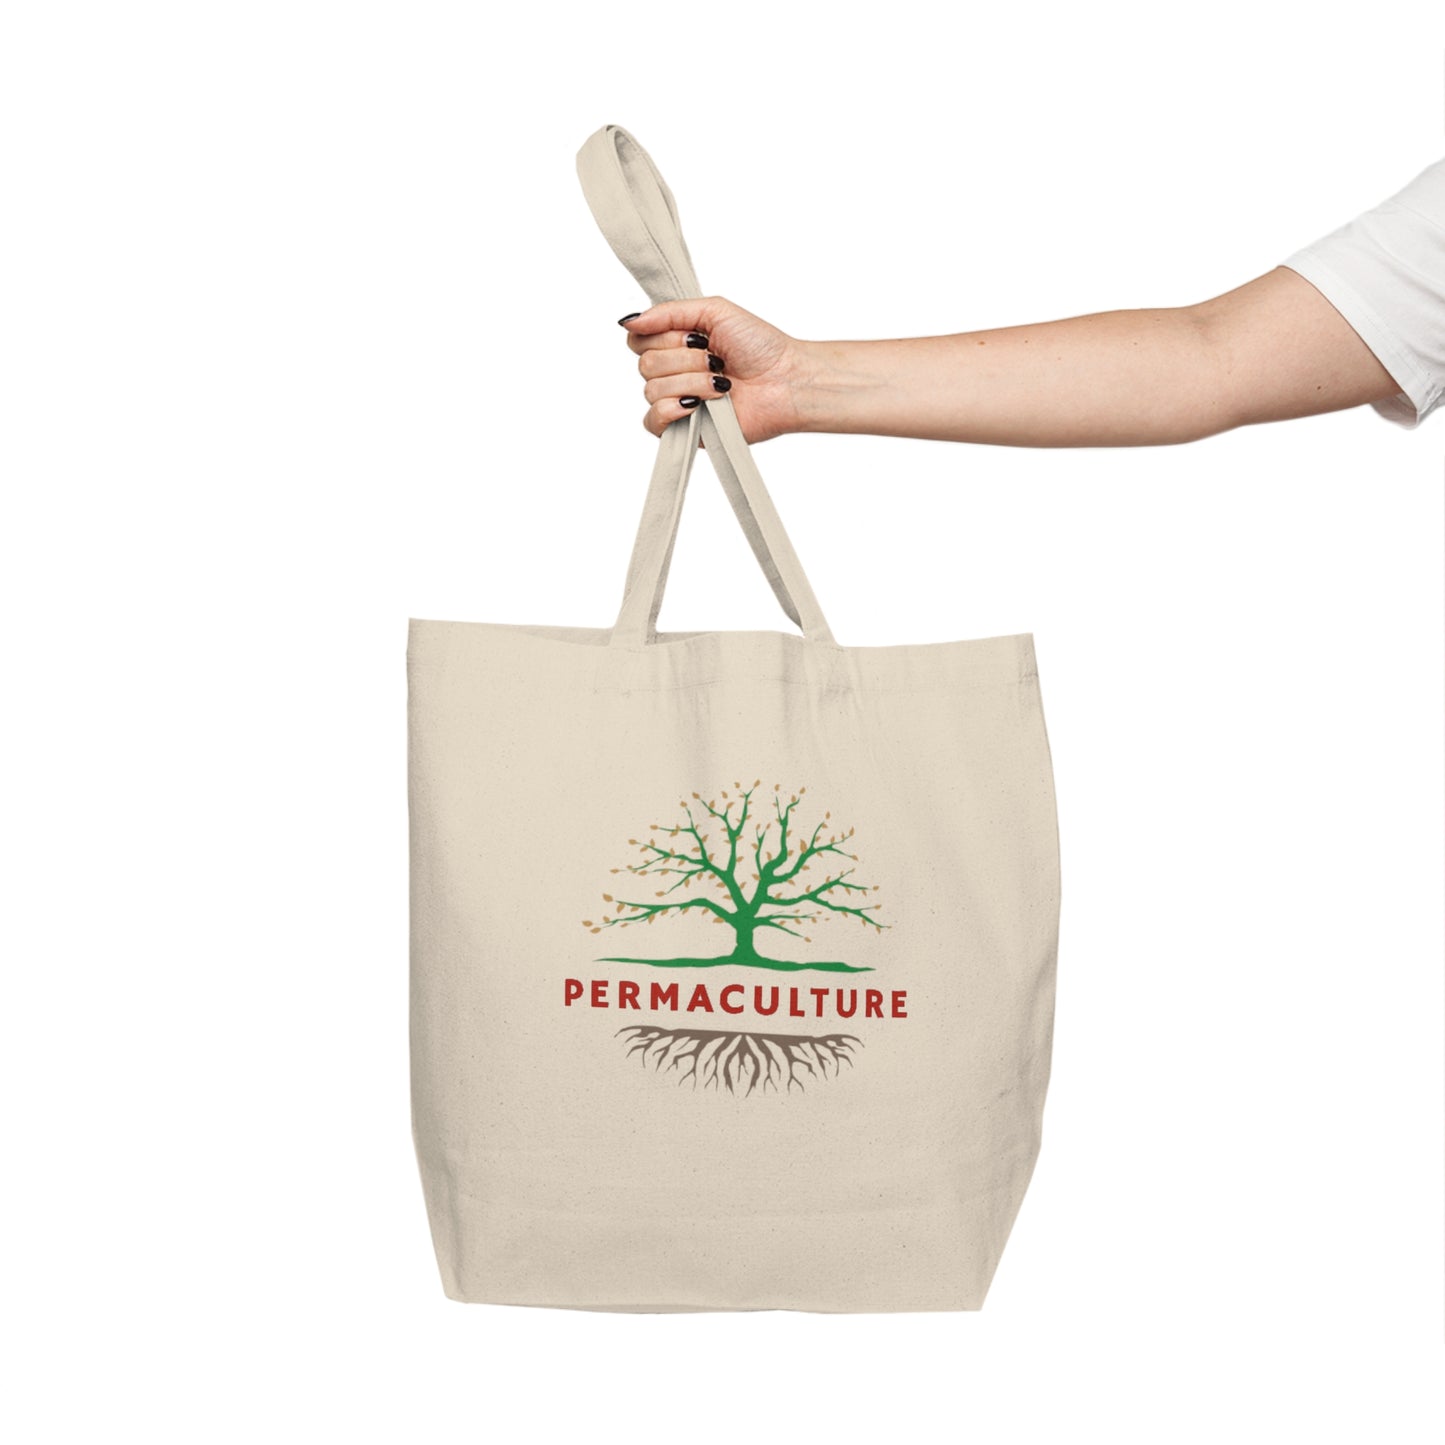 Permaculture Canvas Shopping Tote